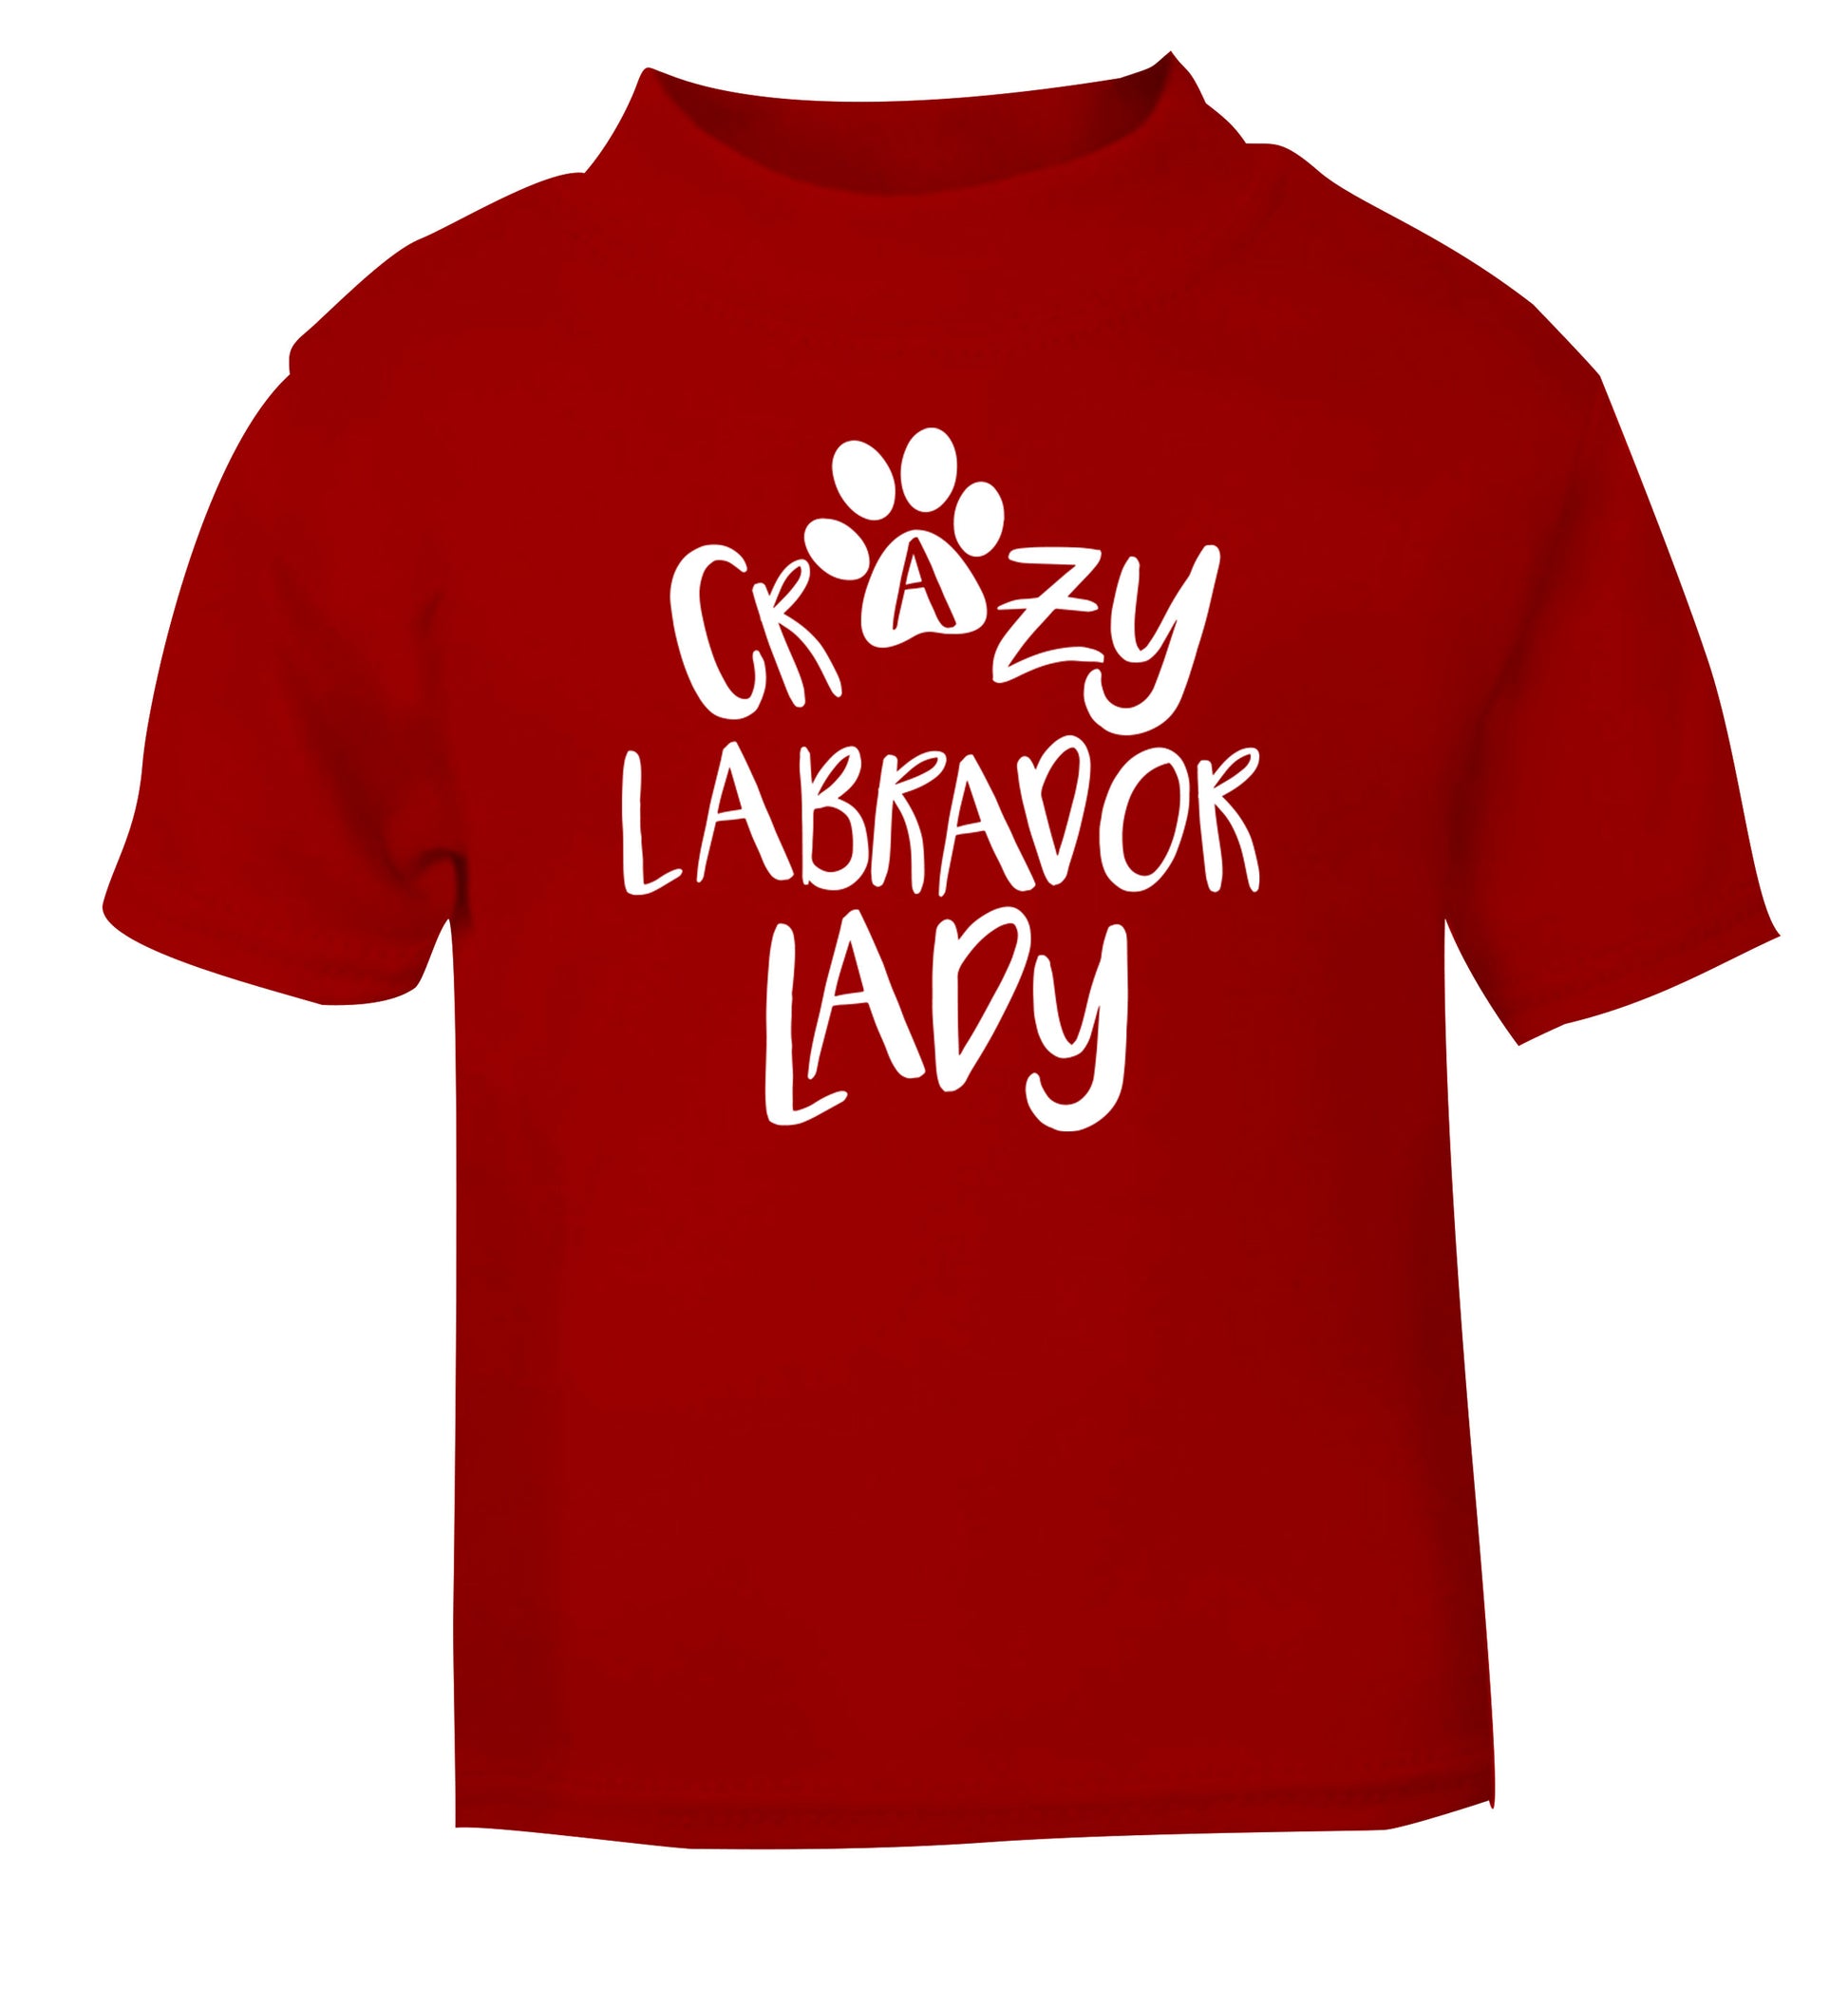 Crazy labrador lady red Baby Toddler Tshirt 2 Years